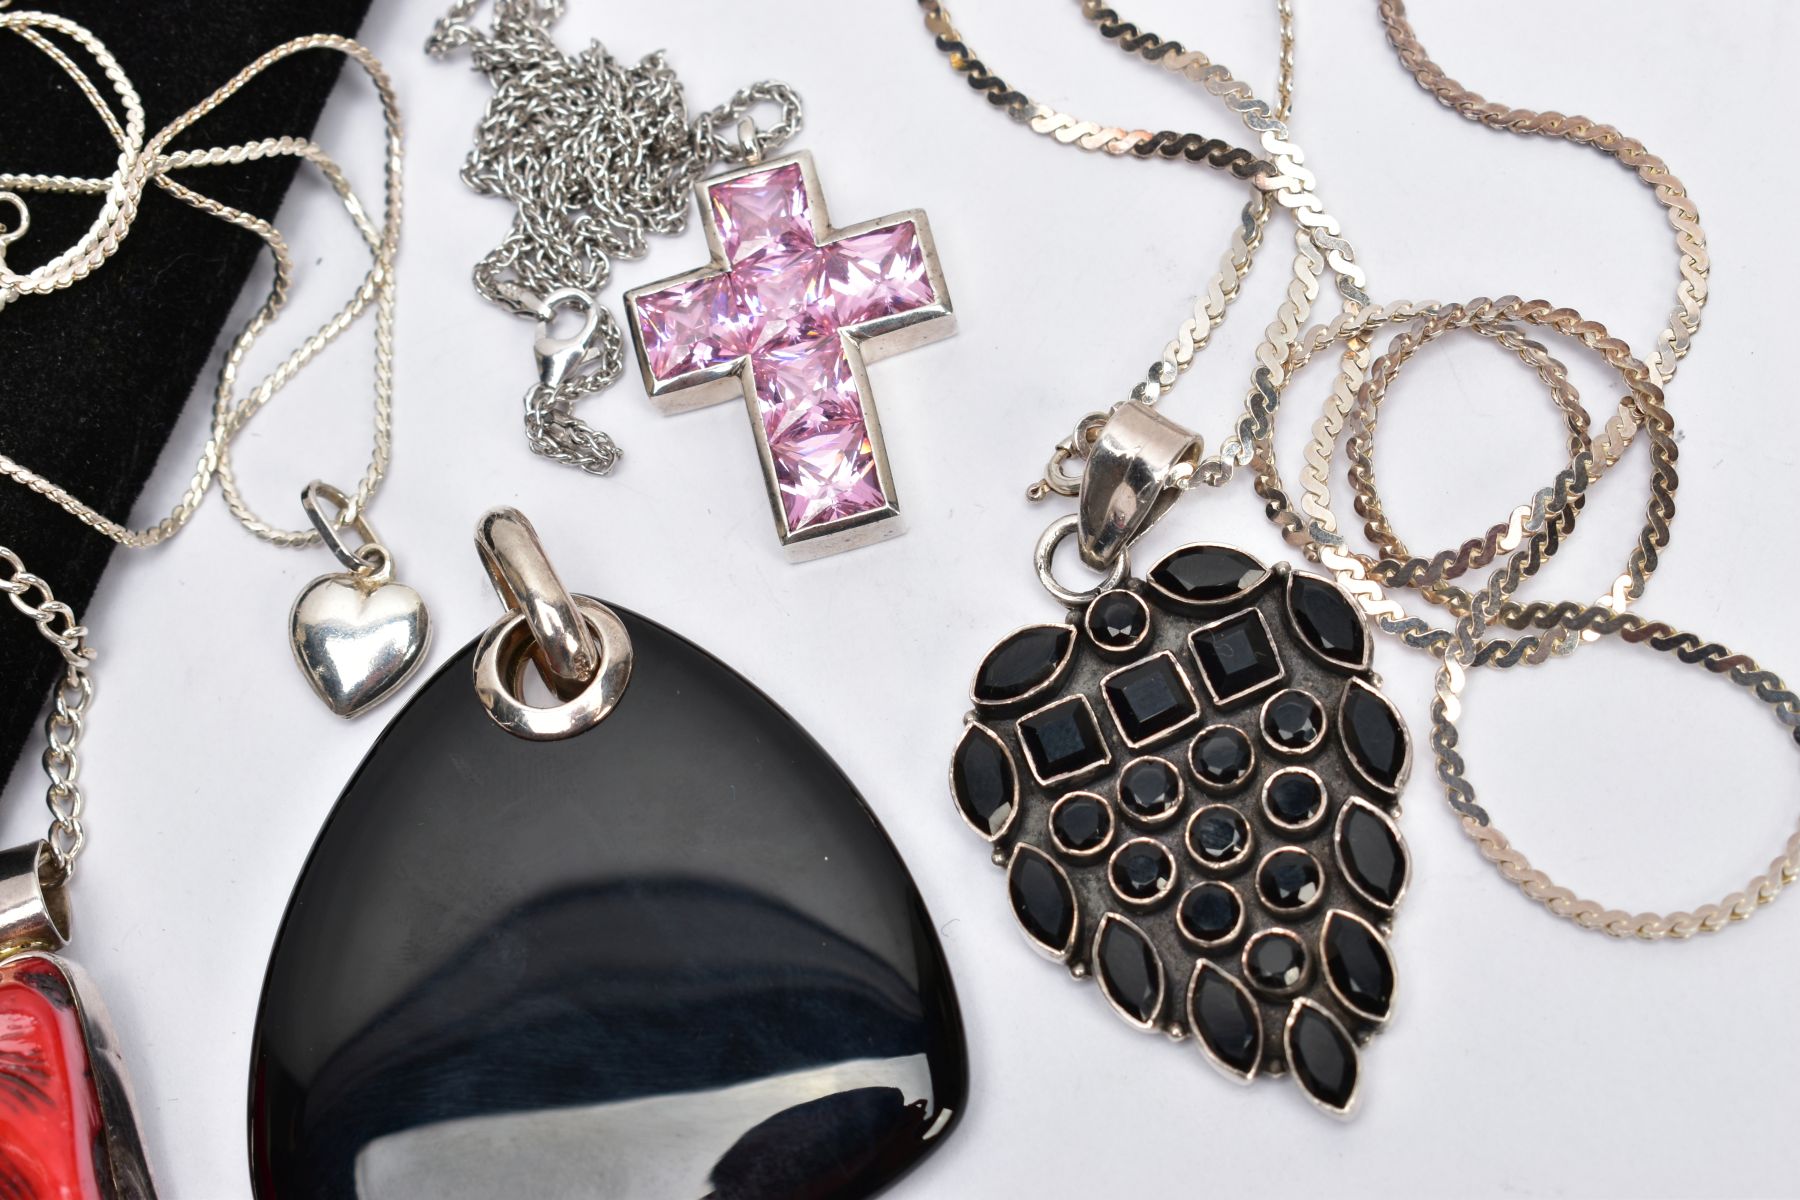 A SELECTION OF PENDANTS, to include a dyed branch coral pendant, a heart pendant, a cross pendant, a - Image 3 of 3